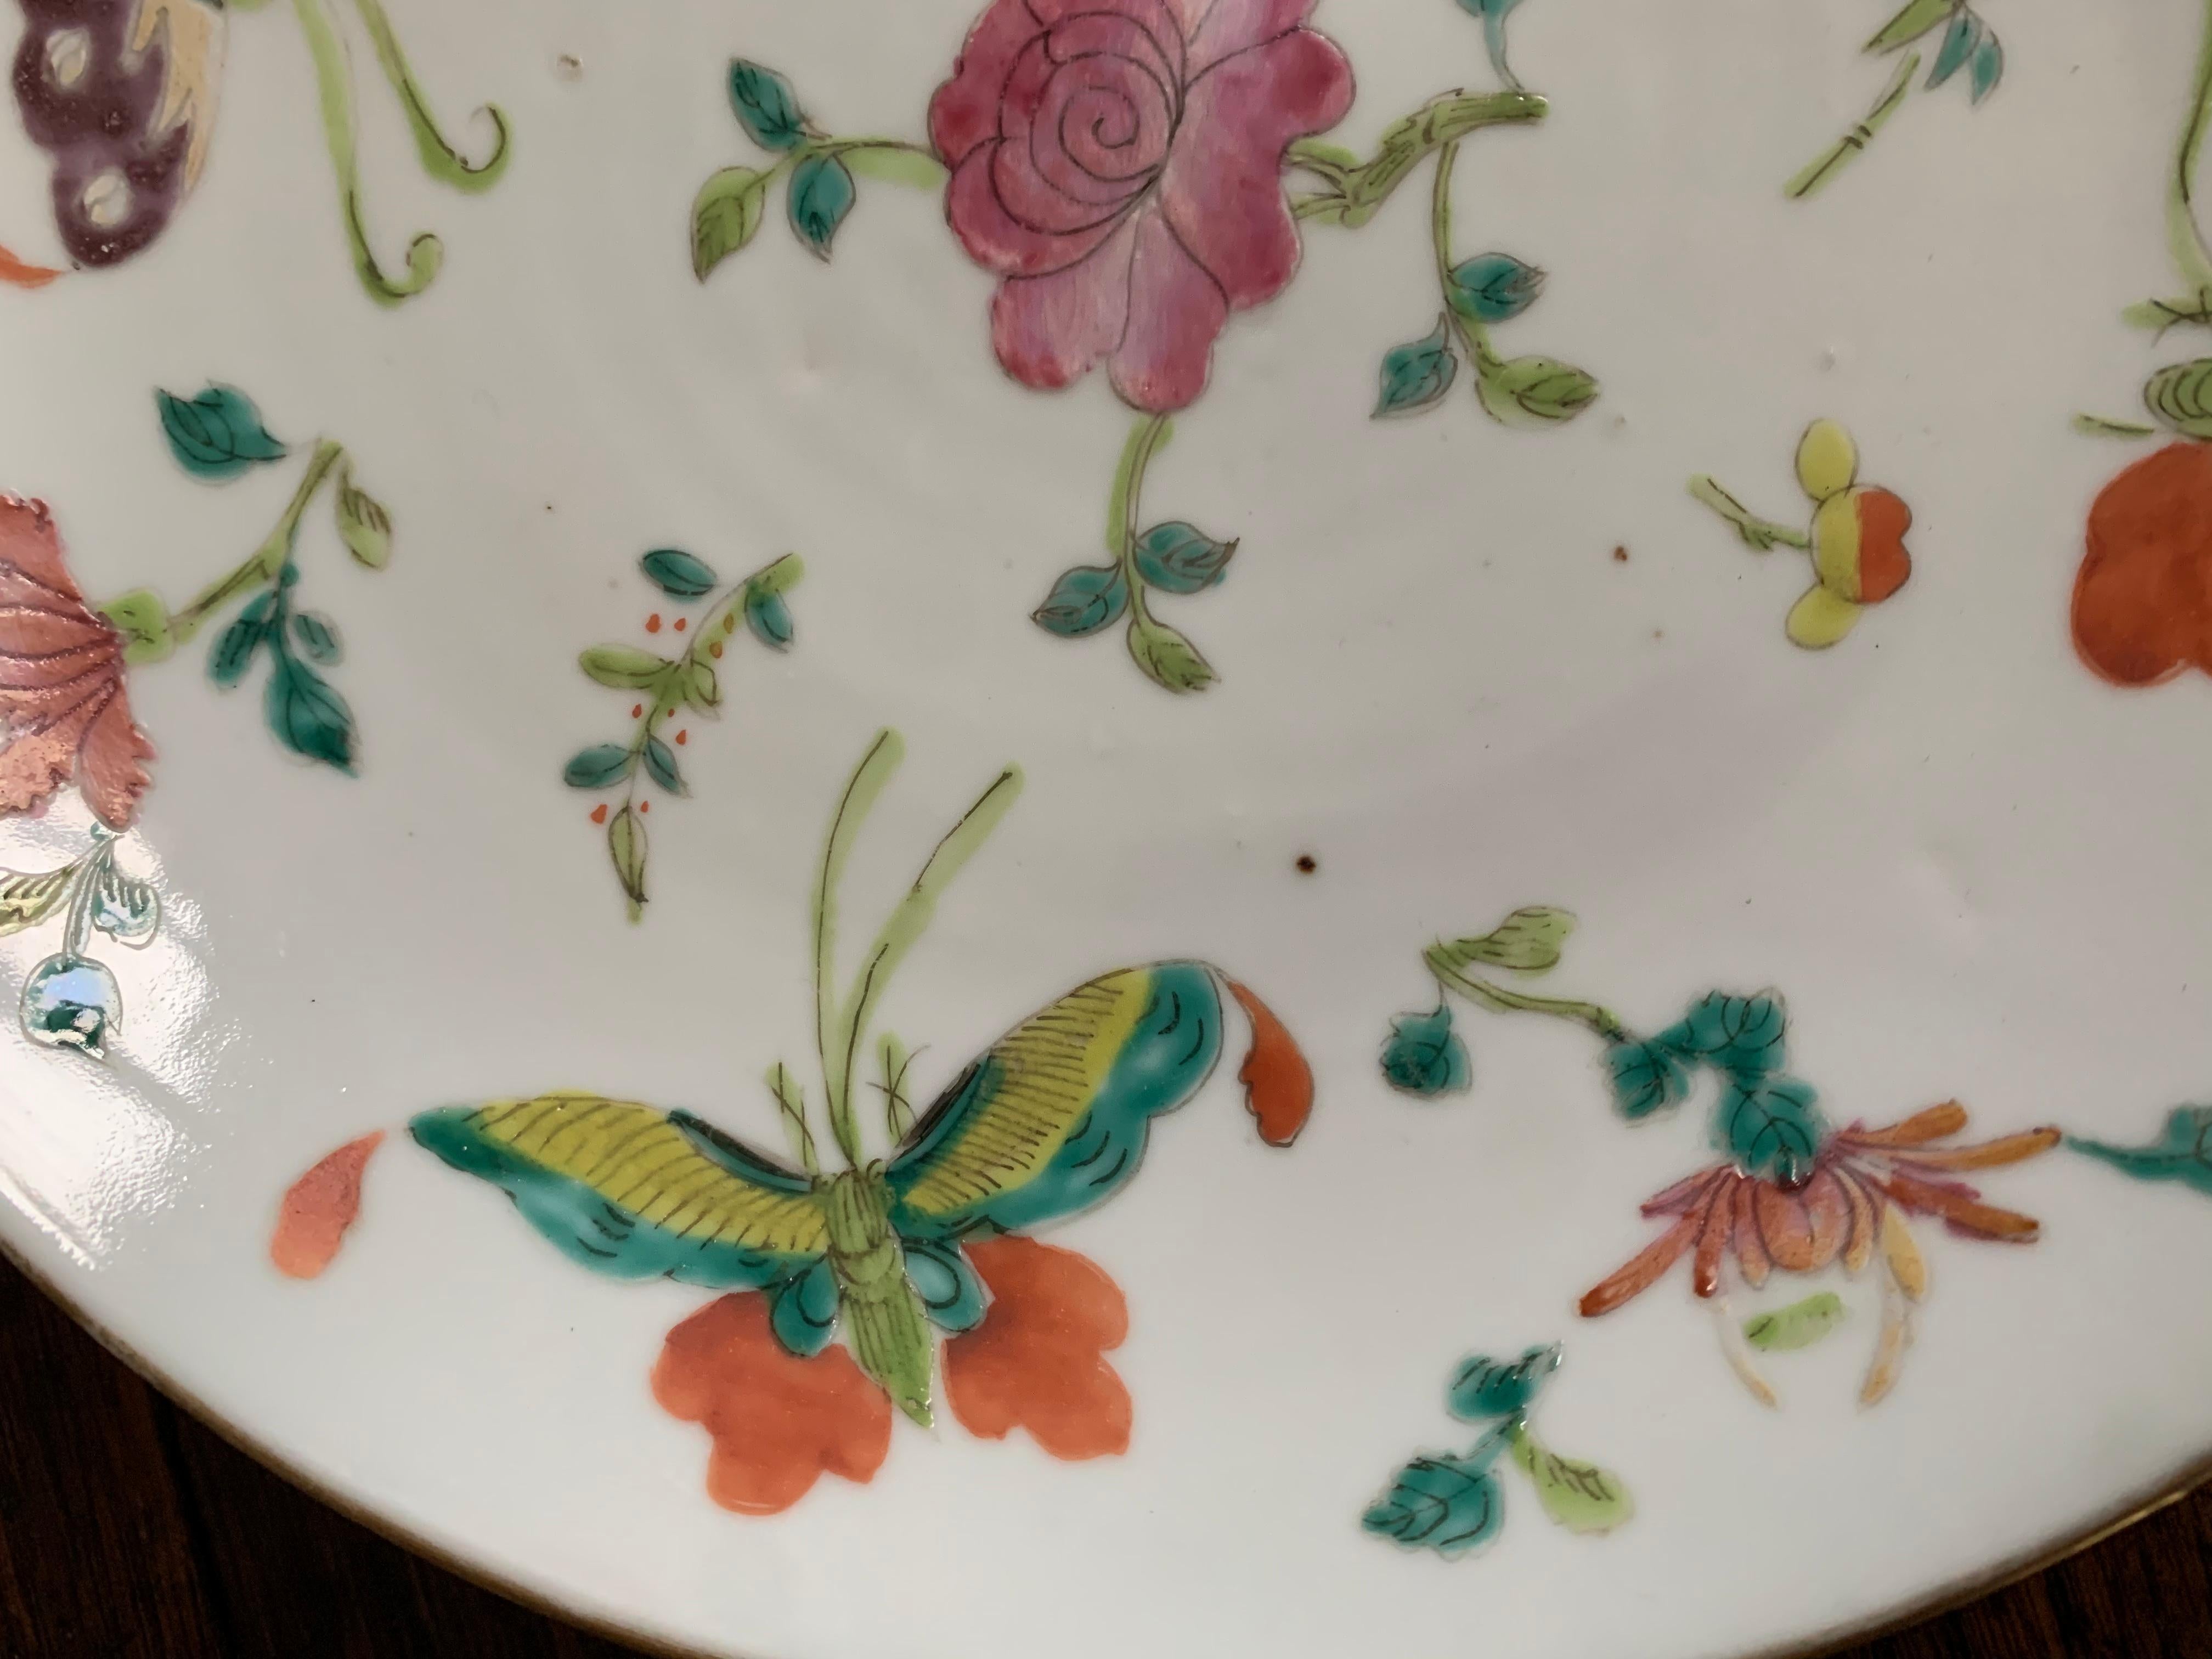 This beautiful porcelain plate is produced from the Qing period, called 